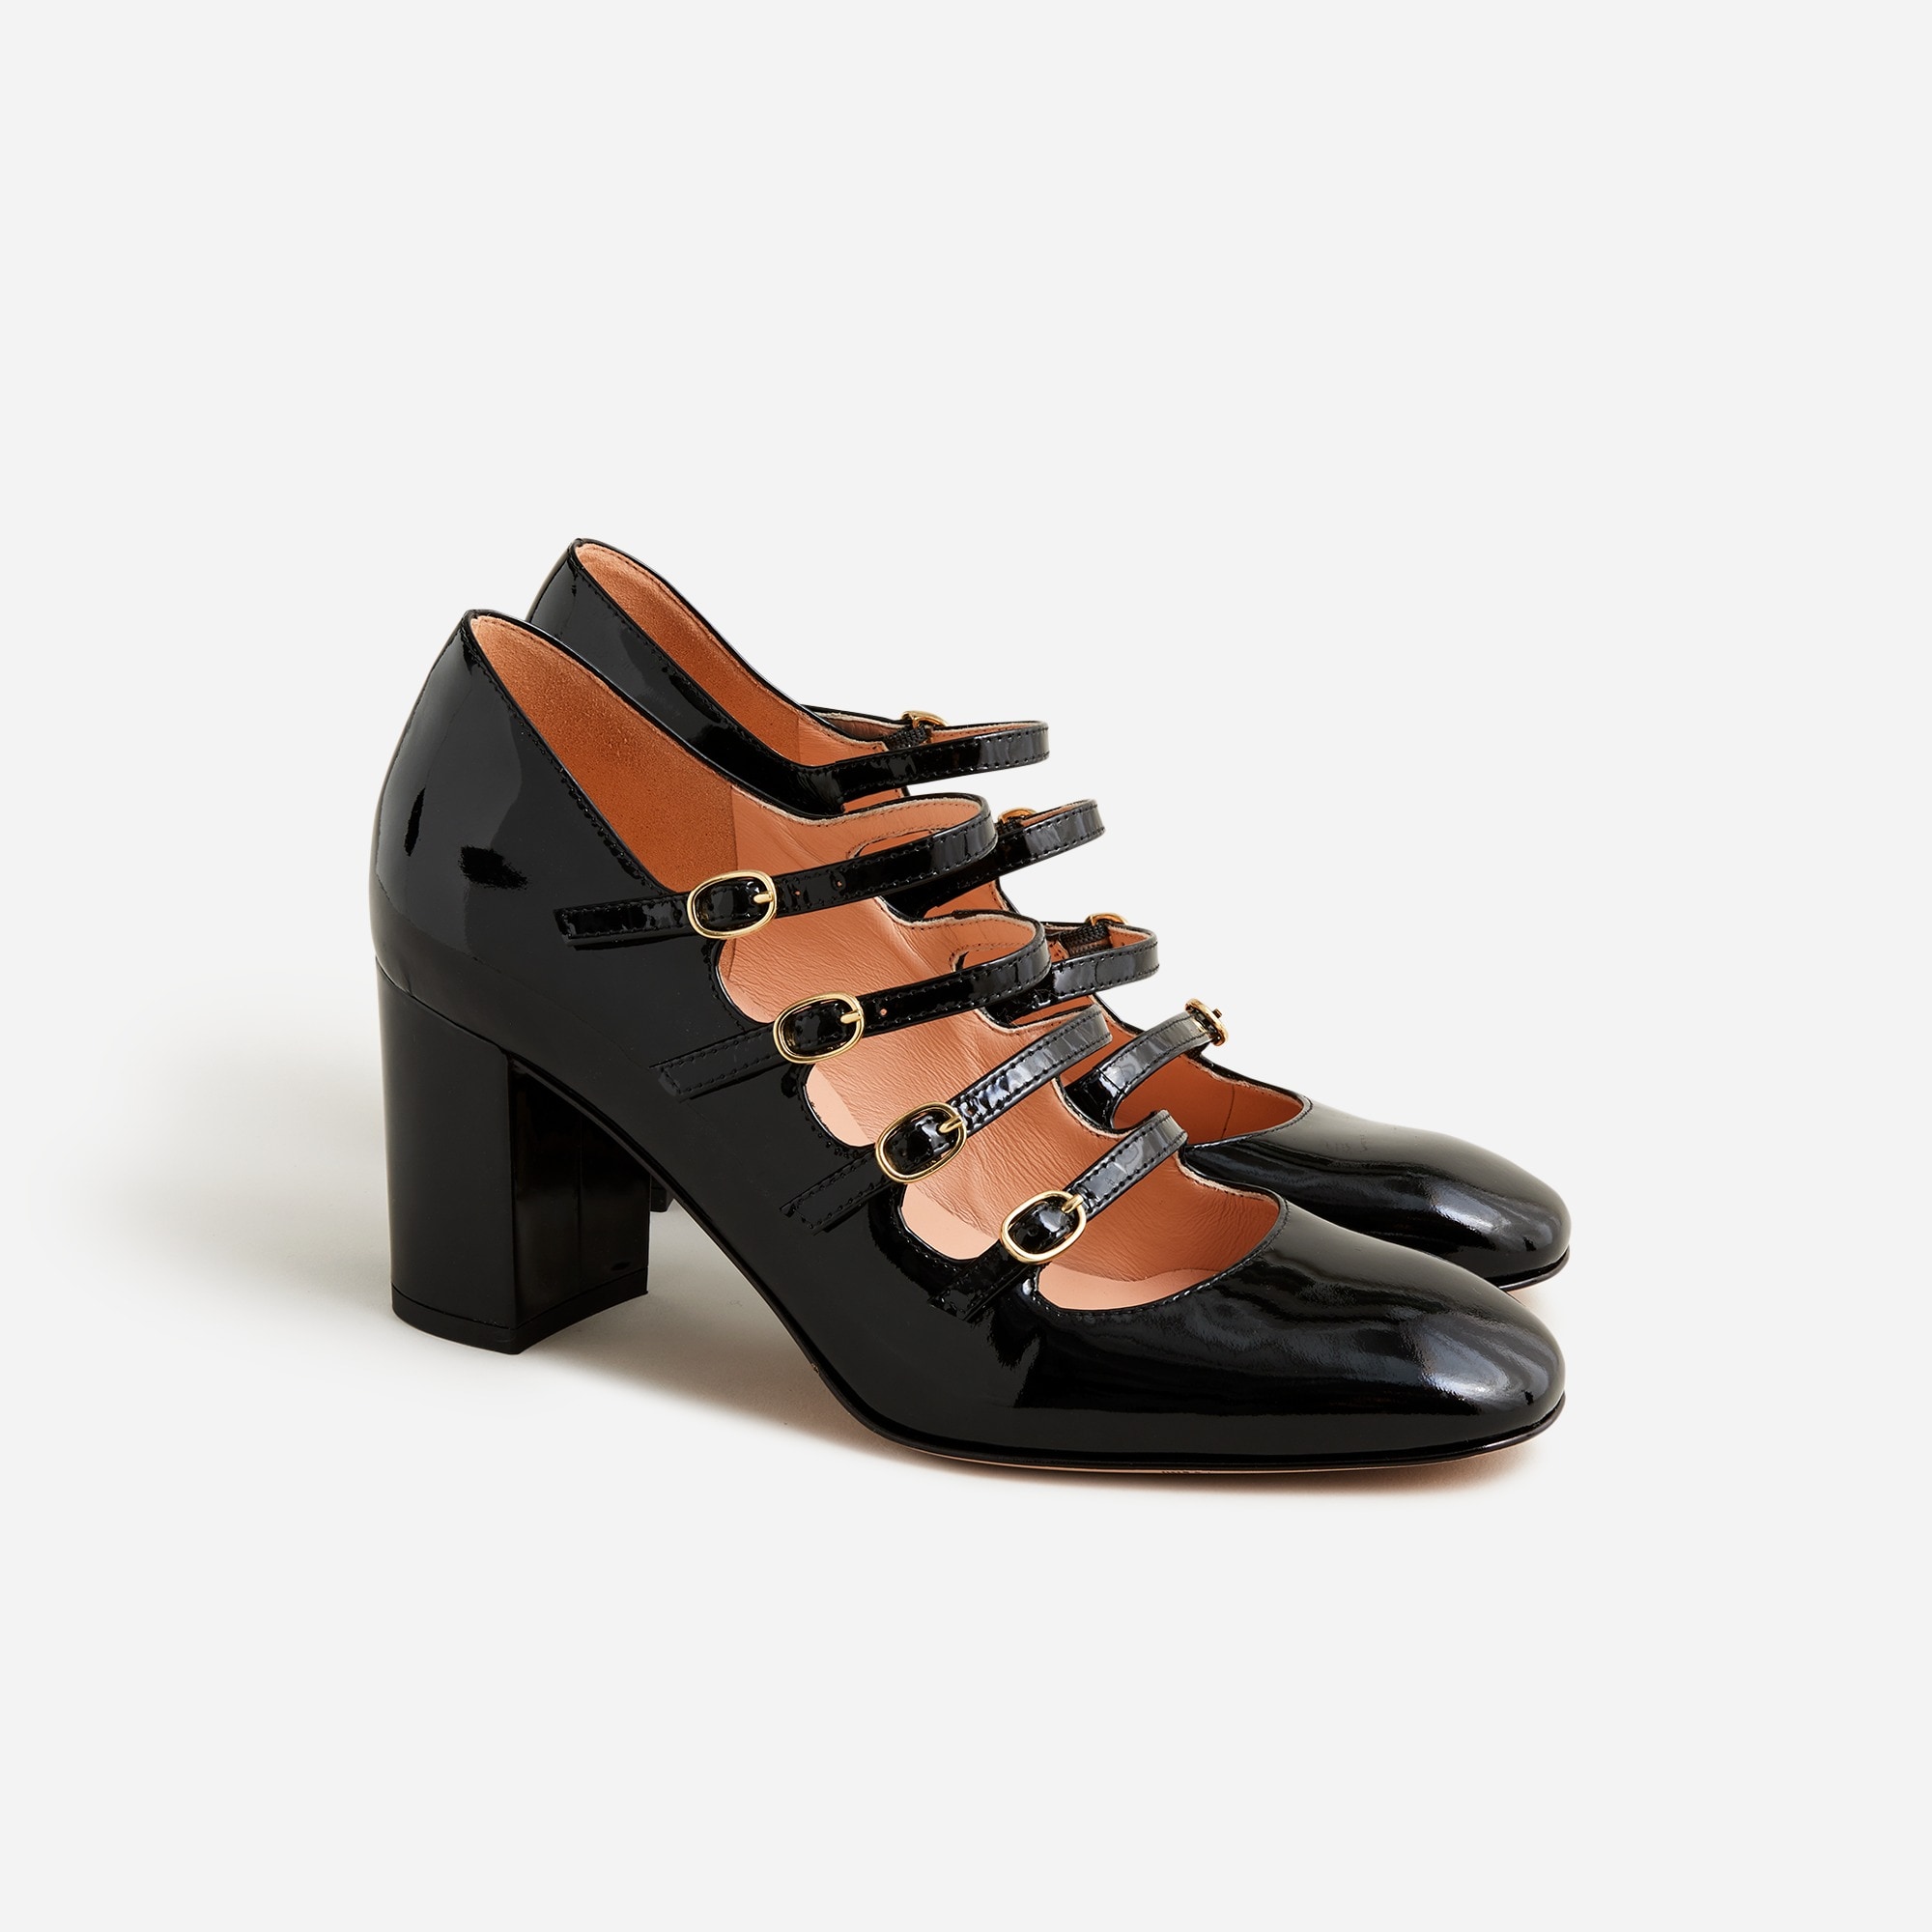  Maisie multistrap heels in patent leather